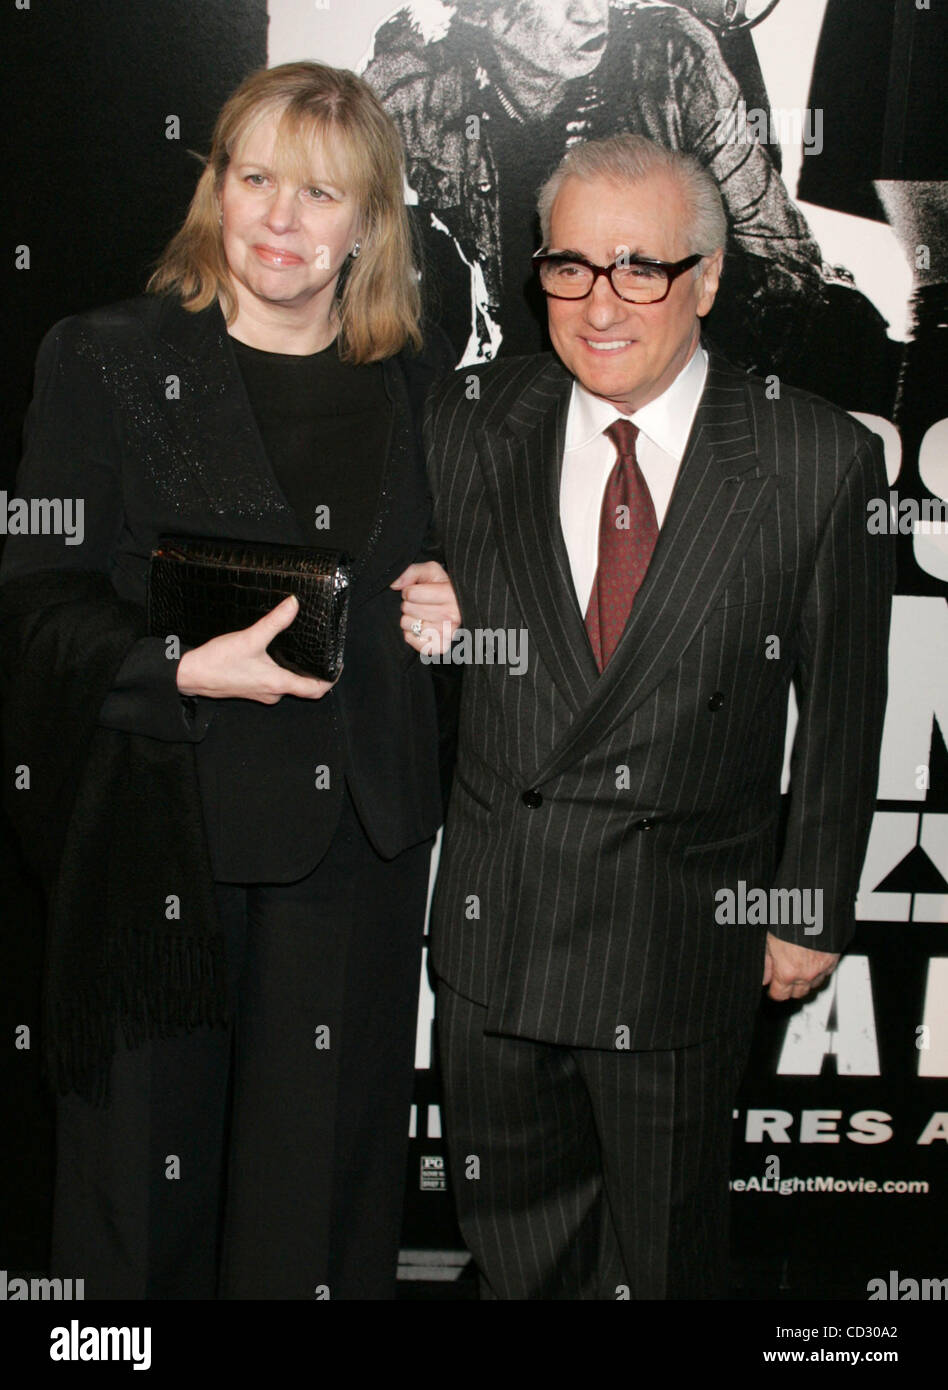 Mar 30, 2008 - New York, NY, USA - Director MARTIN SCORSESE and wife HELEN MORRIS at the arrivals for the New York premiere of 'Shine A Light' held at the Ziegfeld Theater. (Credit Image: © Nancy Kaszerman/ZUMA Press) Stock Photo